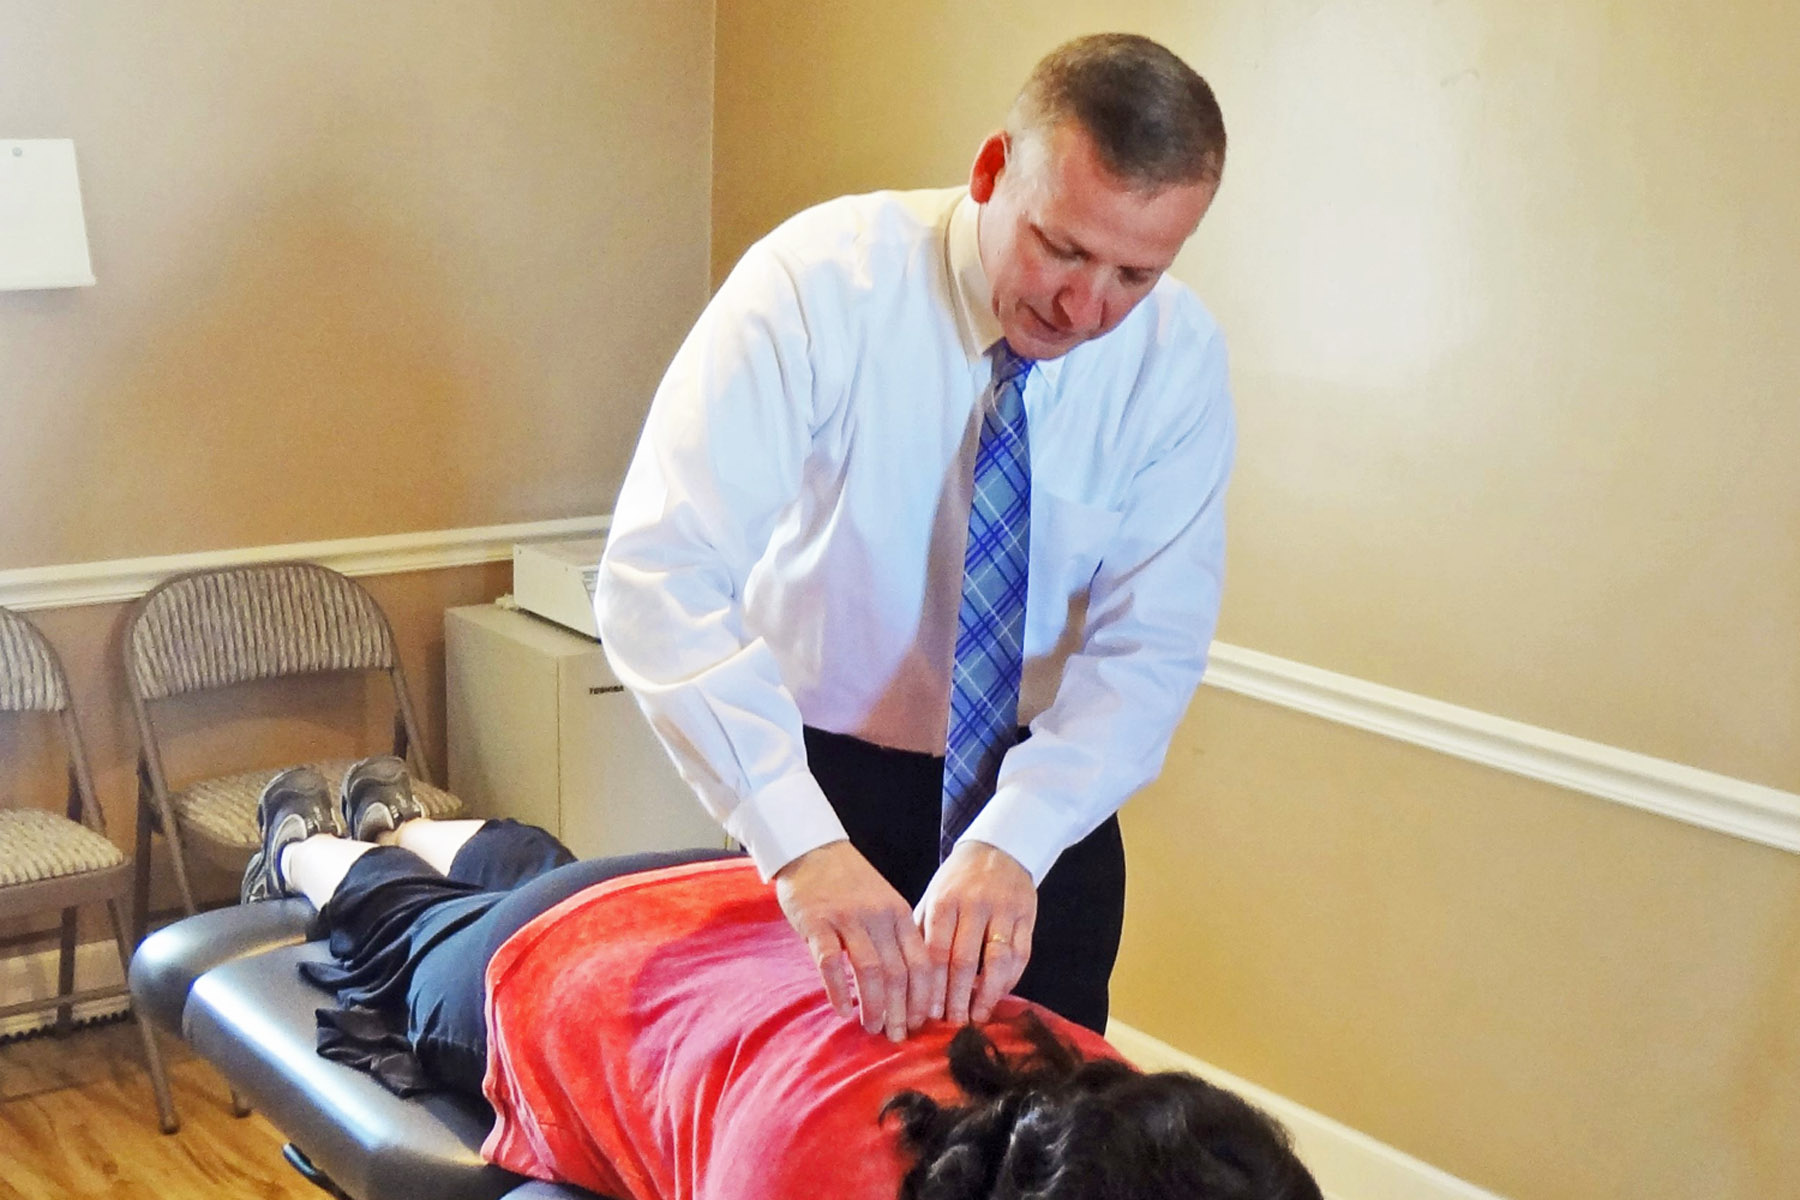 Dr. Dave Madeira provided chiropractic treatment to a patient at his office in Colonial Park, PA